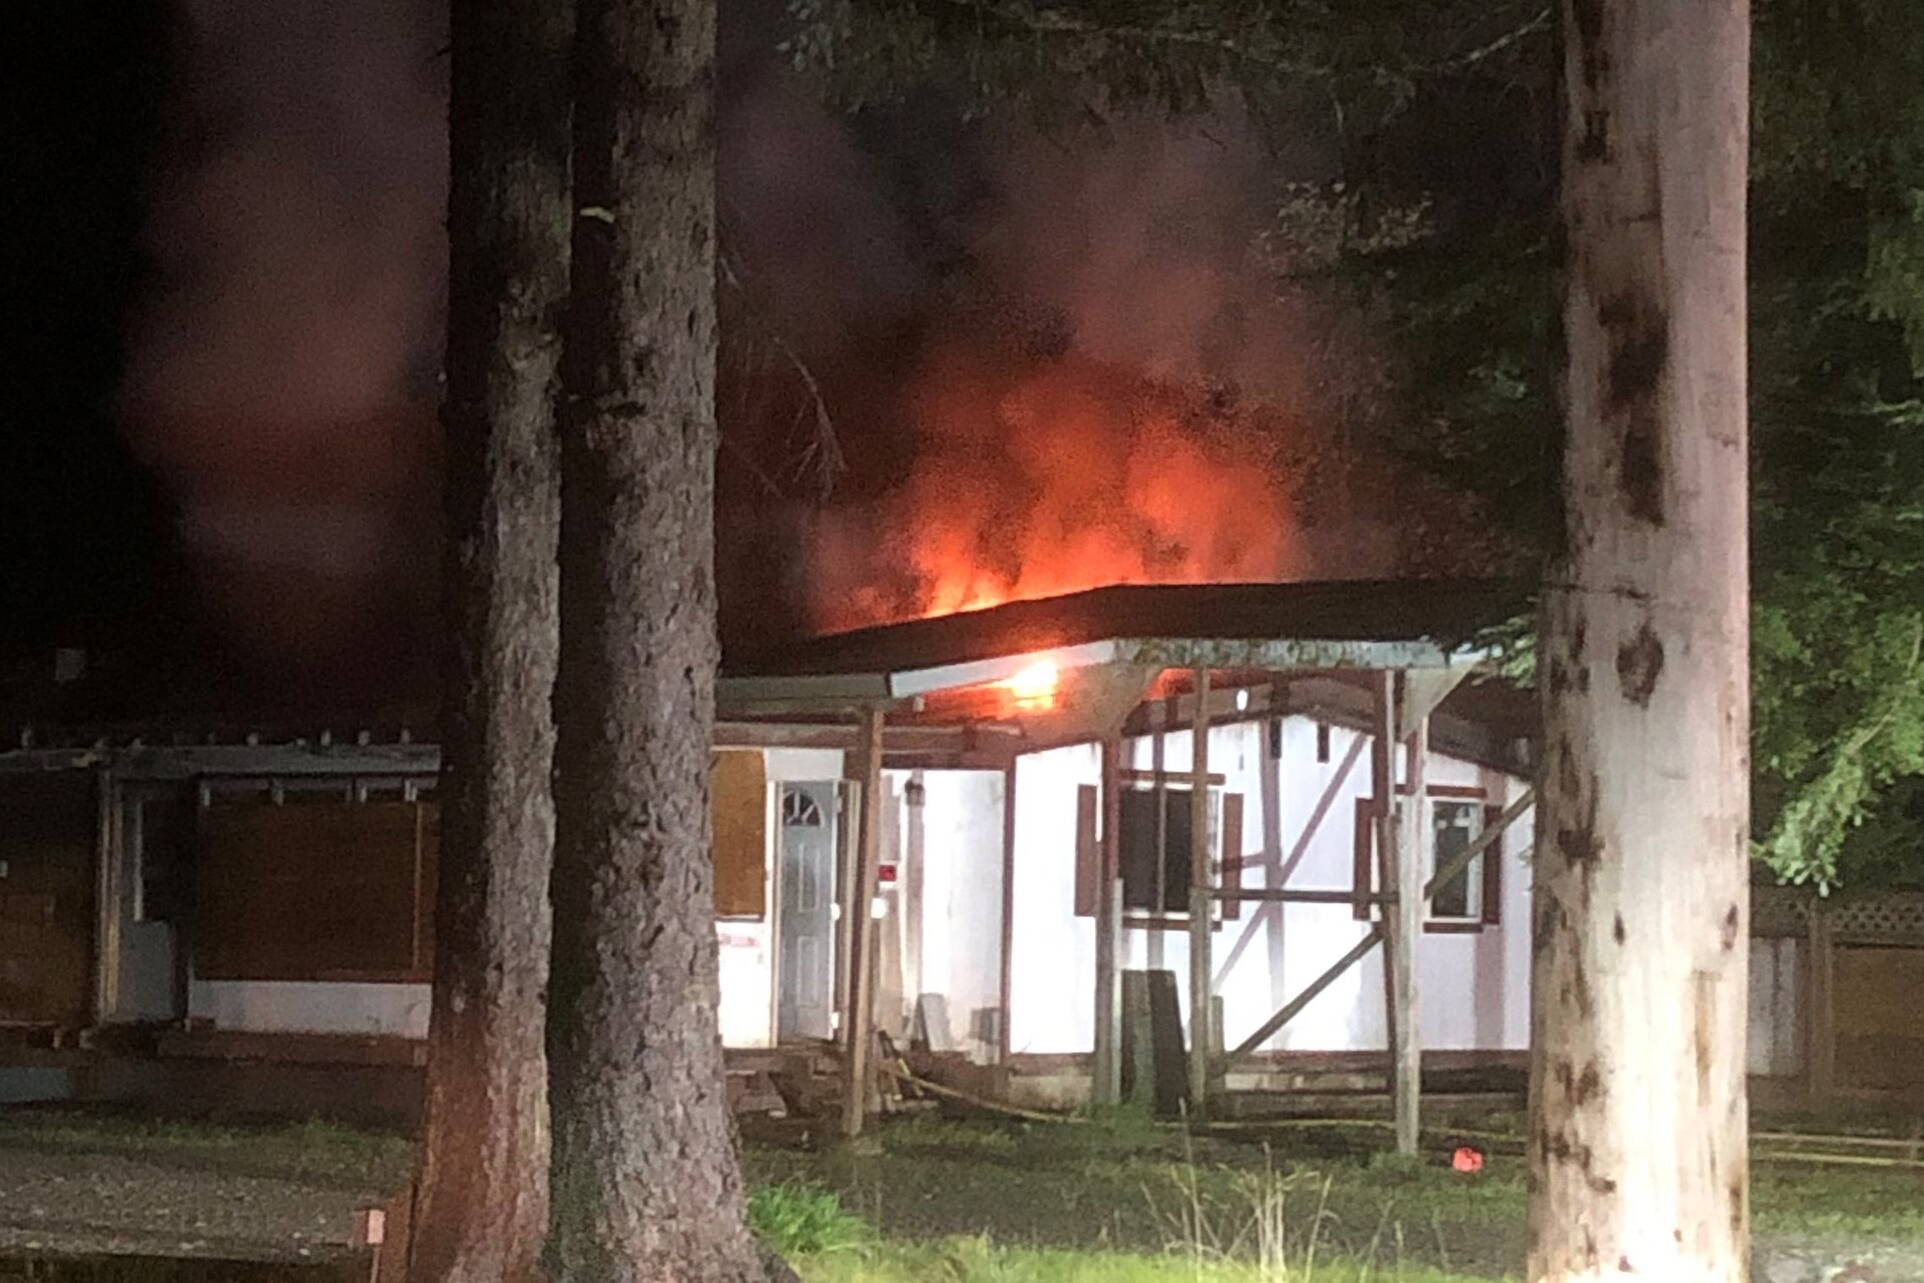 Fire blazes from an abandoned home in the Mendenhall Valley on Tuesday morning. Capital City Fire/Rescue officials are investigating the fire as a possible arson. (Courtesy of Capital City Fire/Rescue)